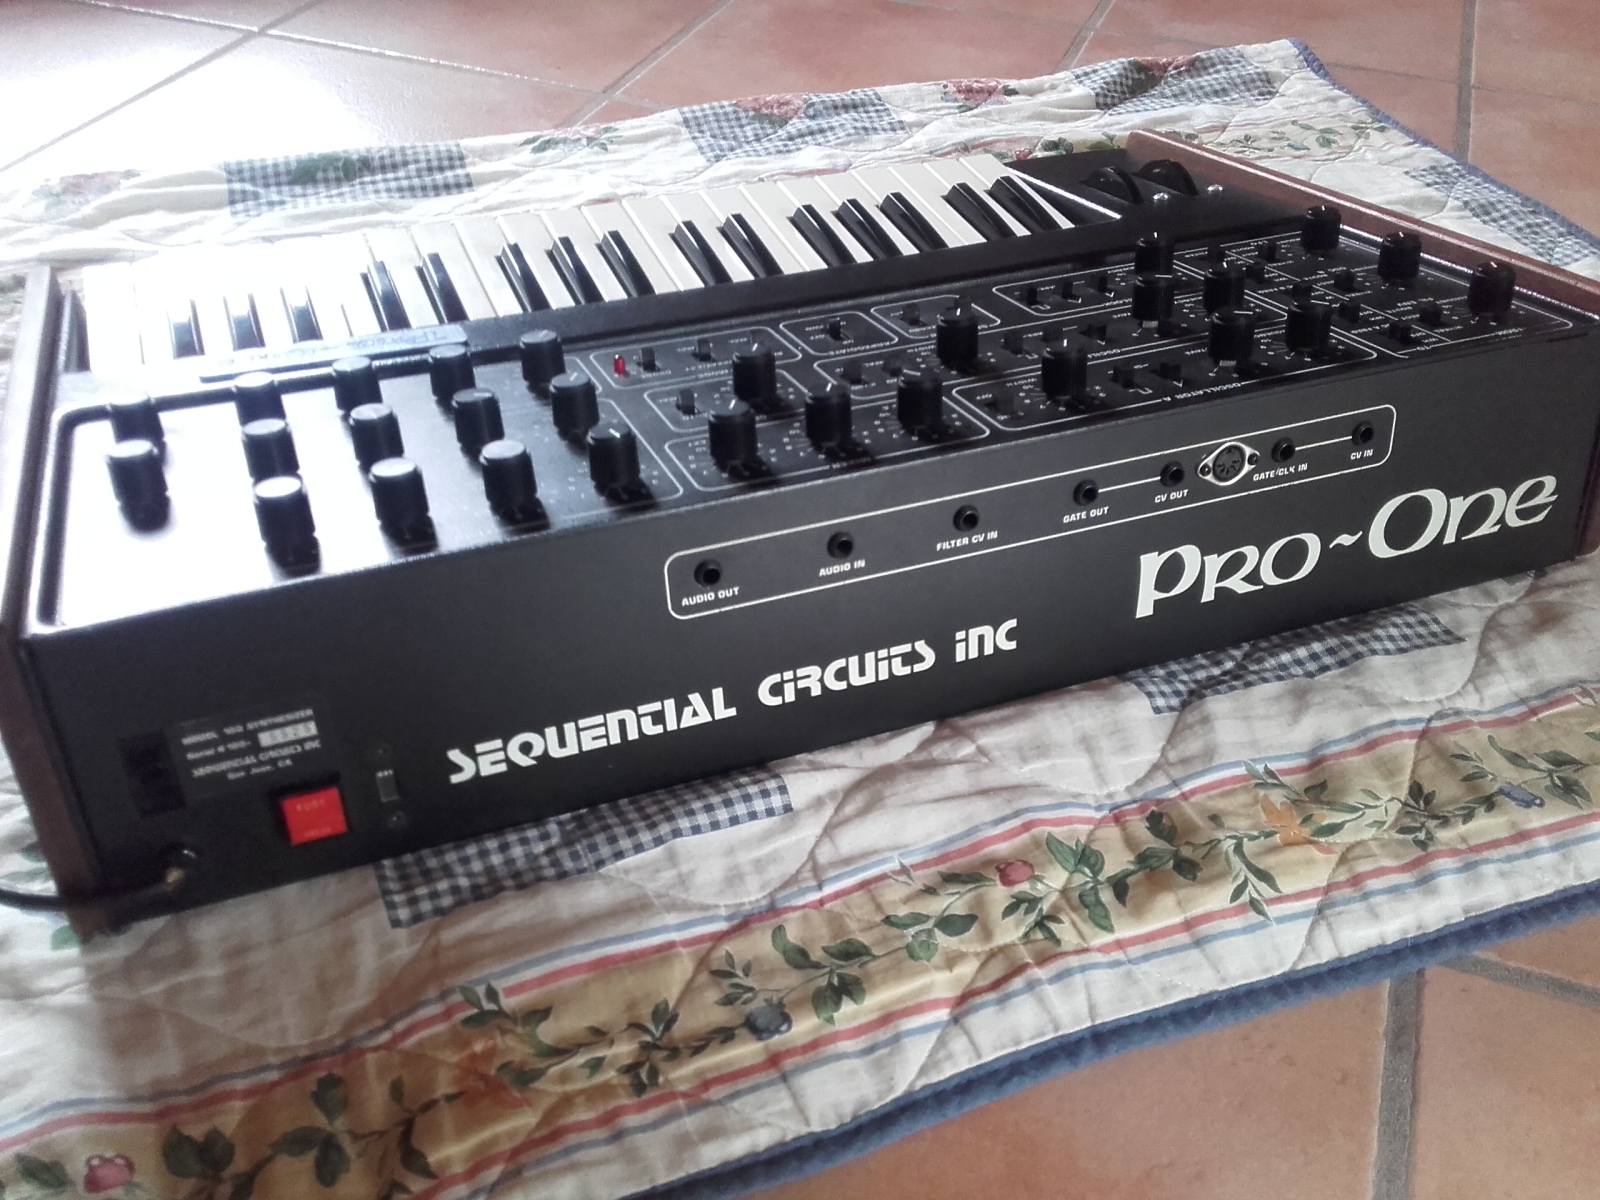 sequential circuits pro one operation manual